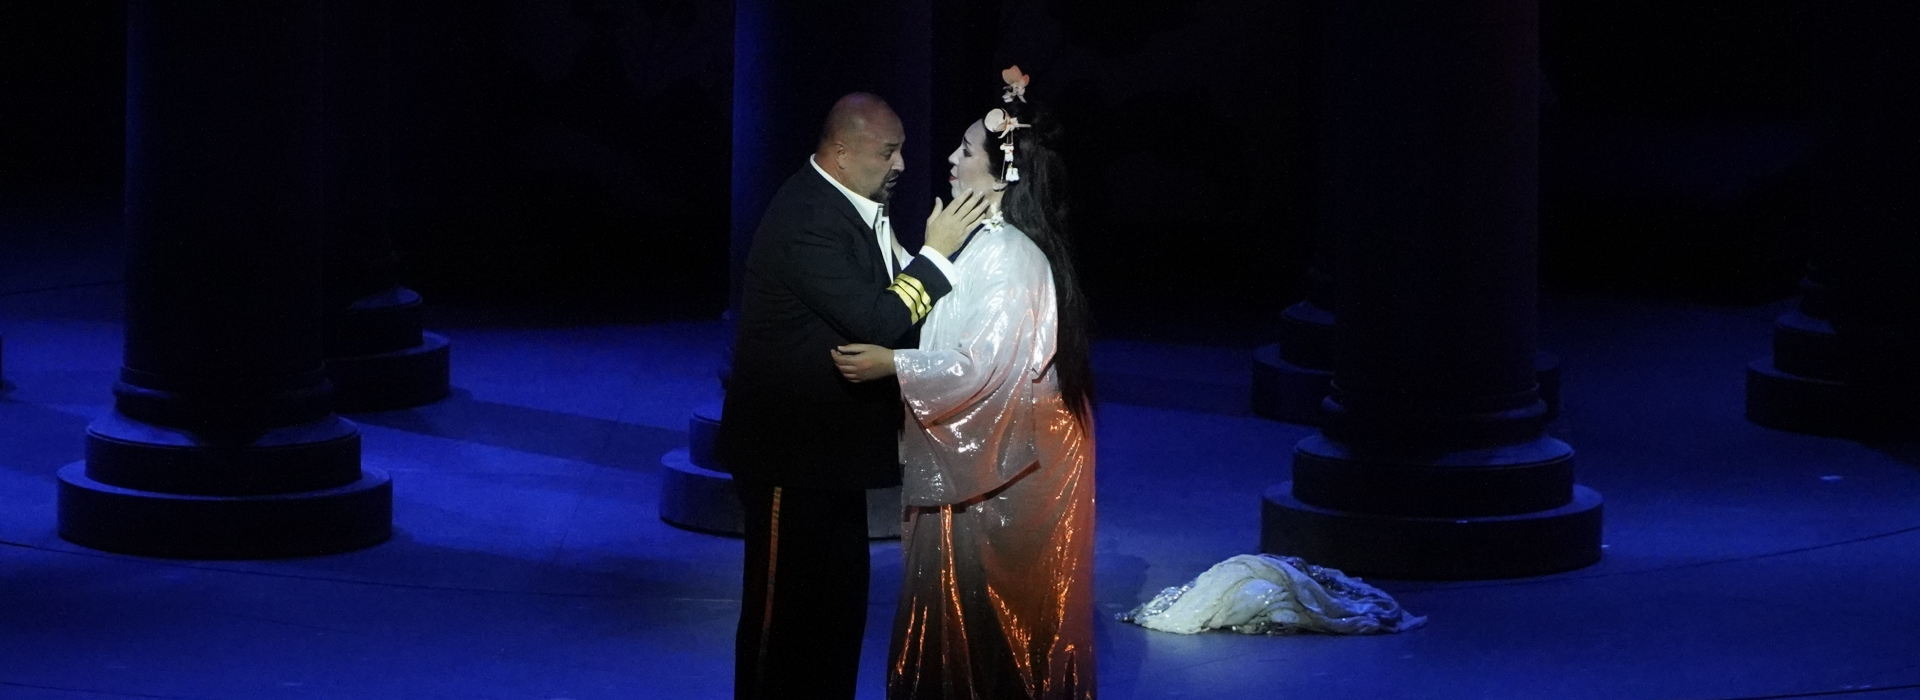 PERALADA’S MADAMA BUTTERFLY SPREAD ITS WINGS IN THE ROYAL OPERA HOUSE, MUSCAT